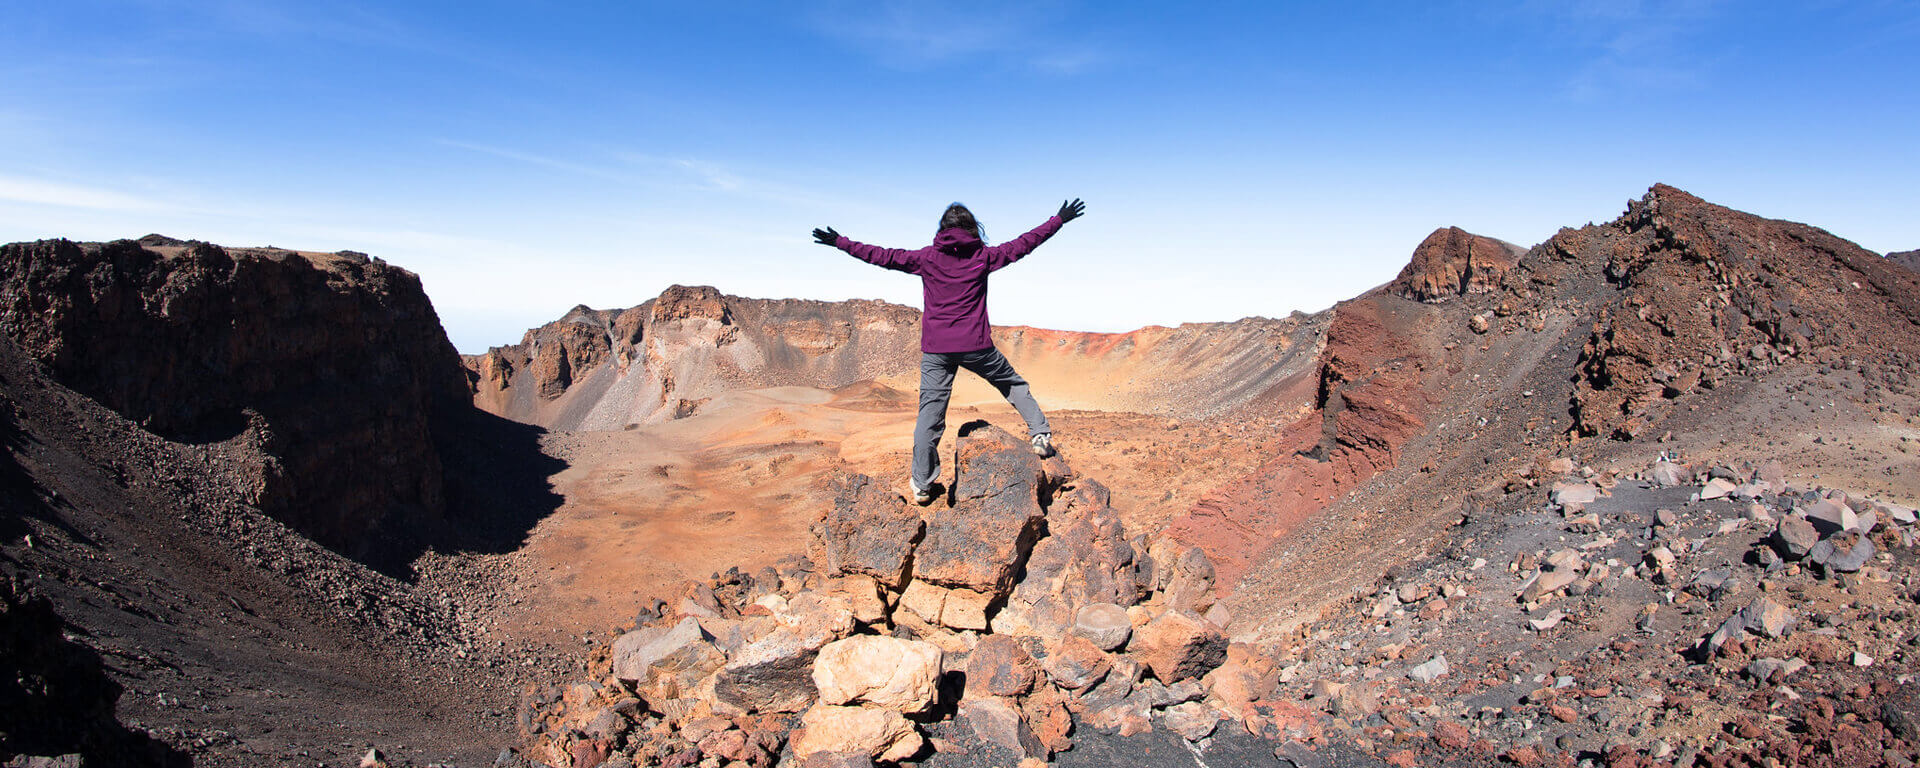 11 Best & Amazing Hiking Destinations in Africa That Will Satiate Your Craving of Adventure